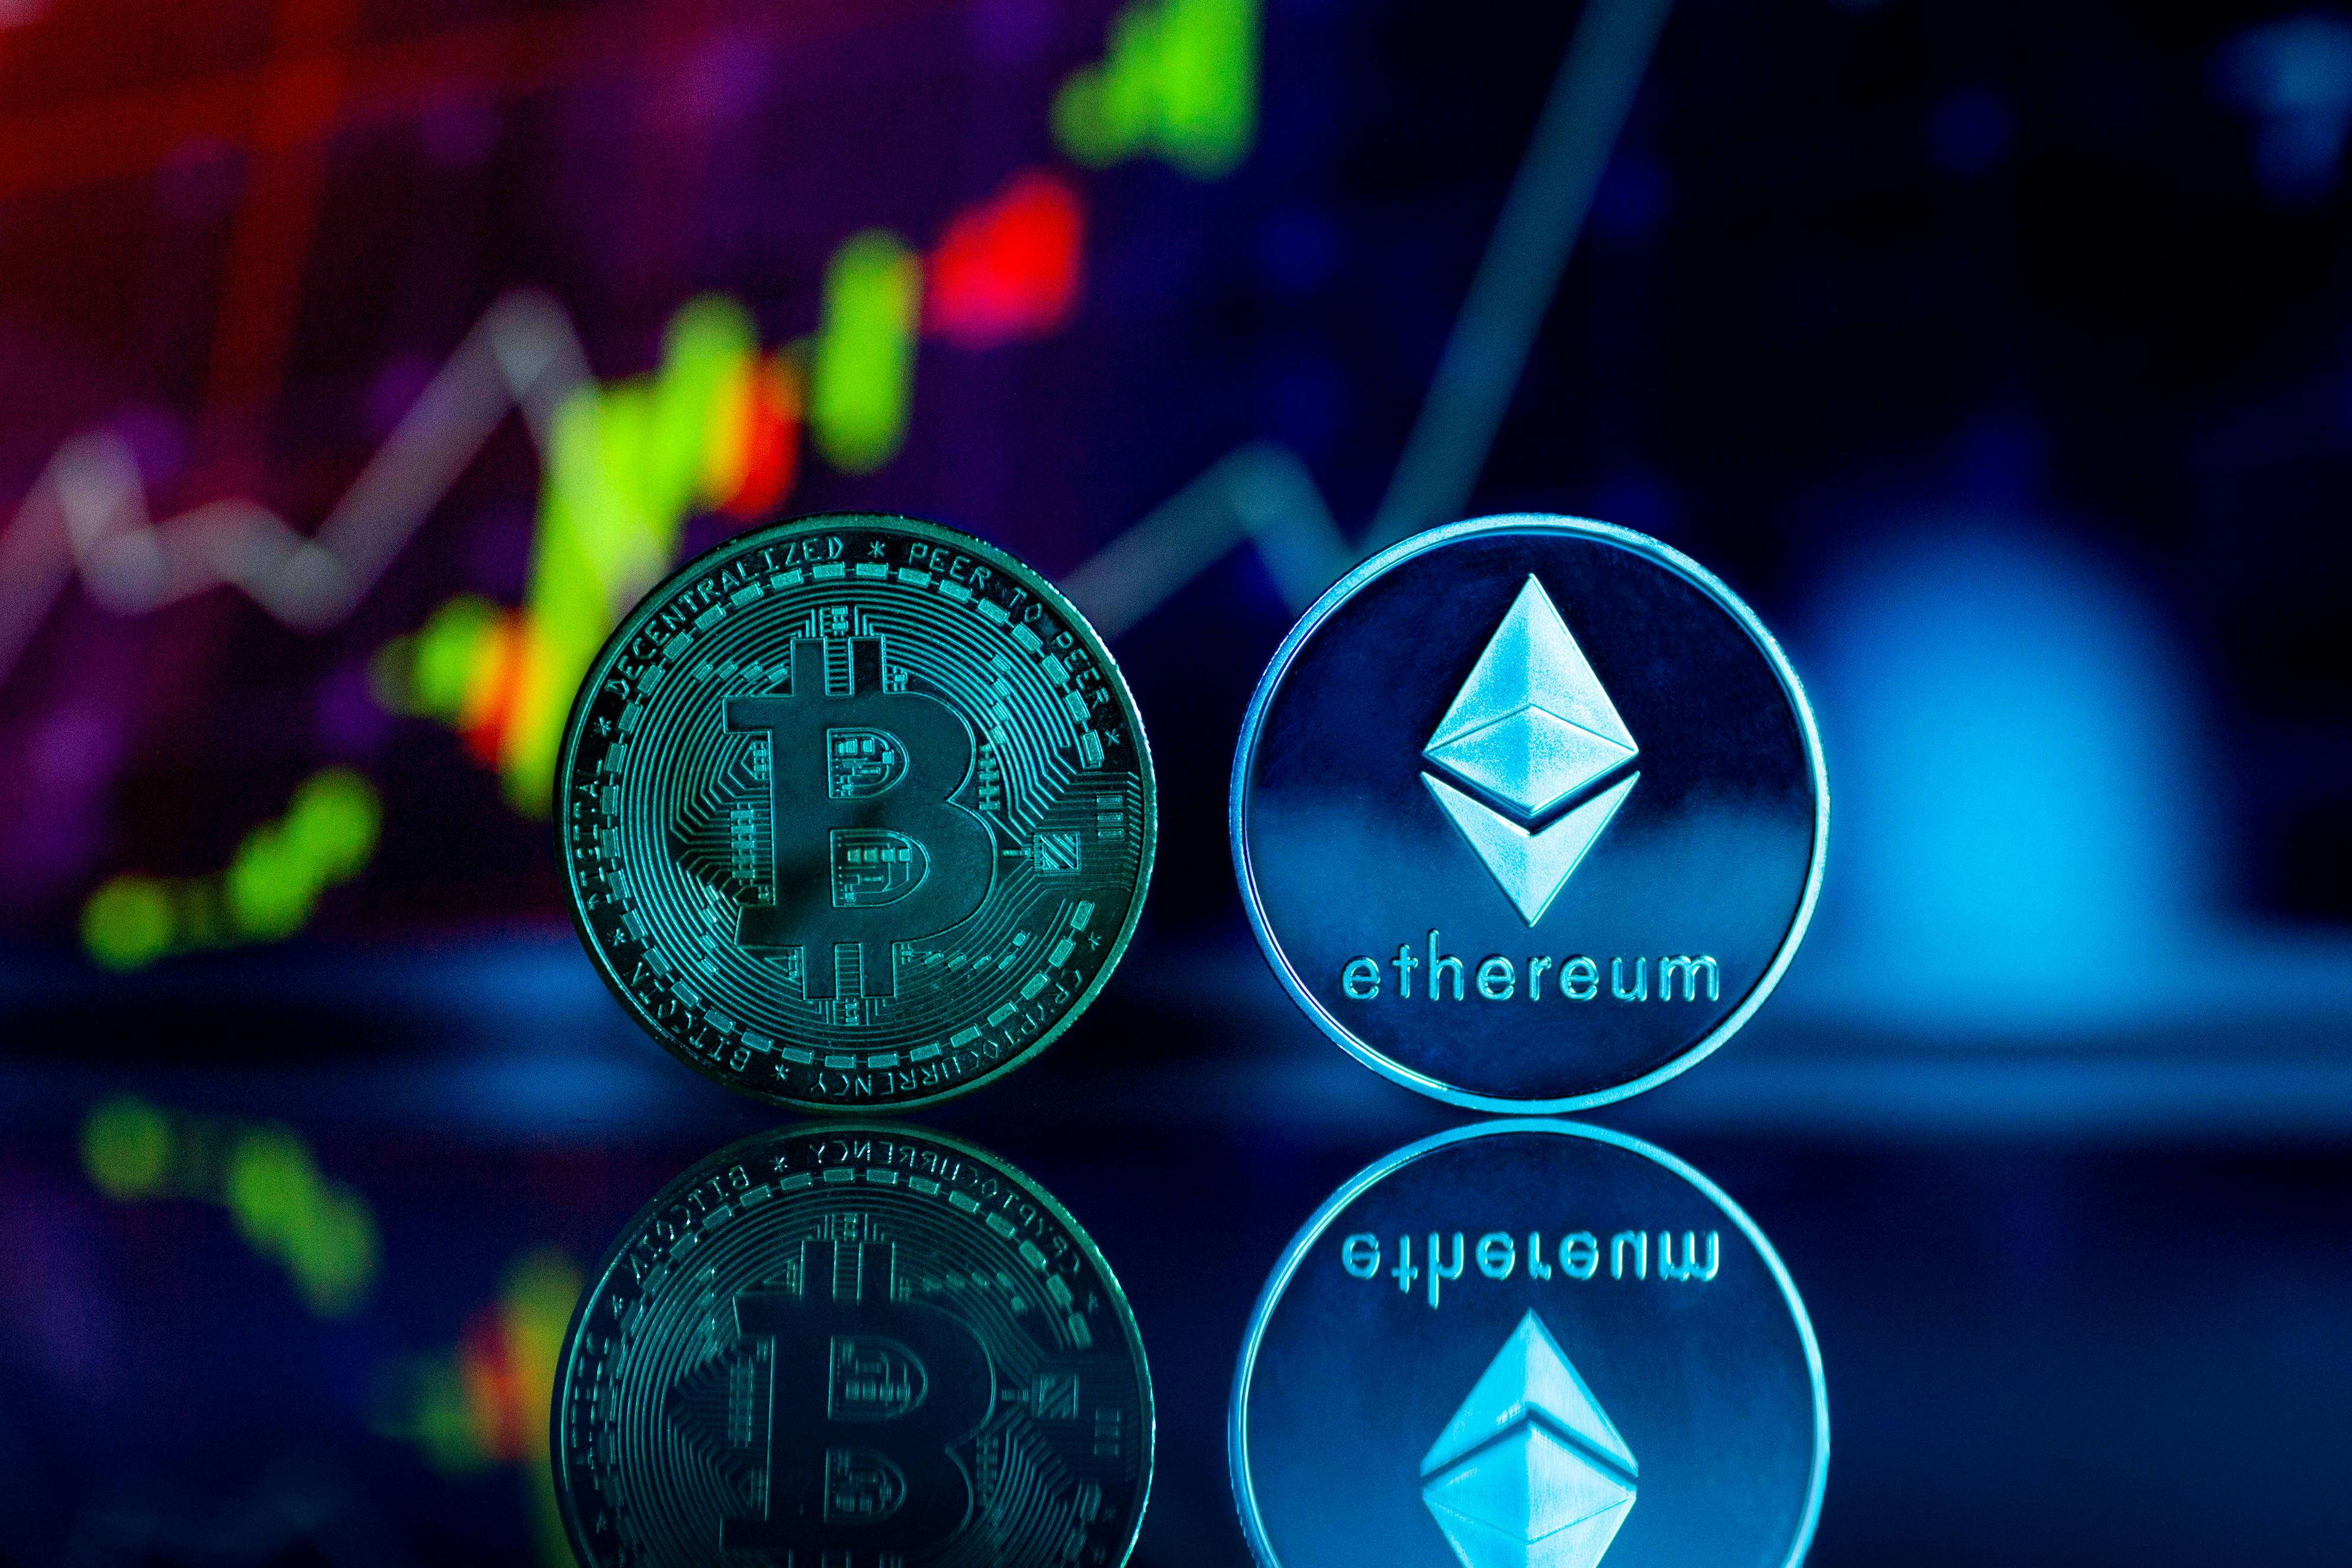 Bitcoin and Ethereum Face Key Challenges Ahead